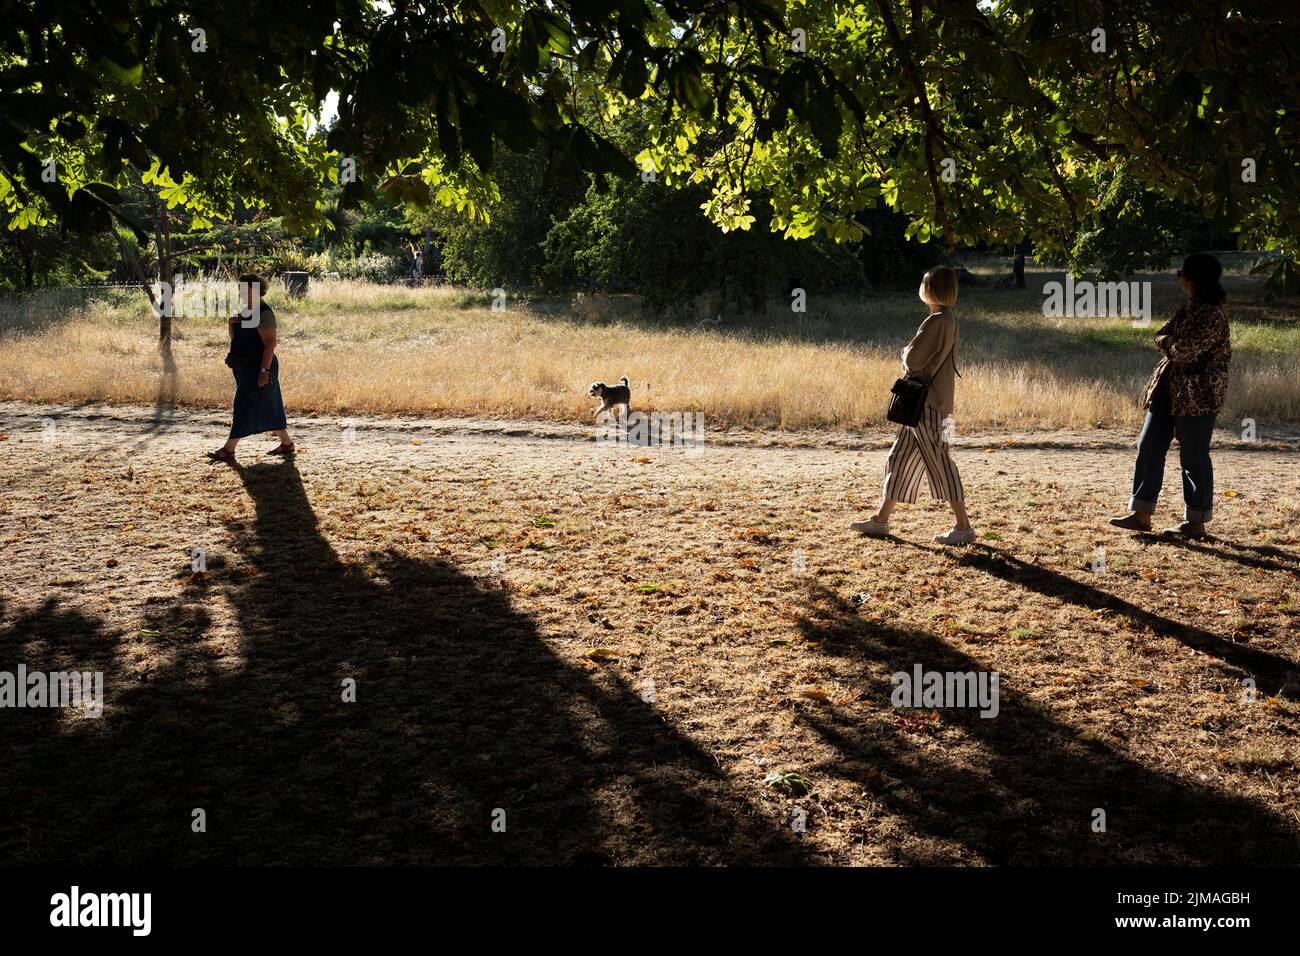 South Londoners walk a dog over a parched park landscape in Ruskin Park, a south London public space as the UK's heatwave and drought continues into August with little rain having fallen in London and south-east England, on 5th August 2022, in London, England. Stock Photo